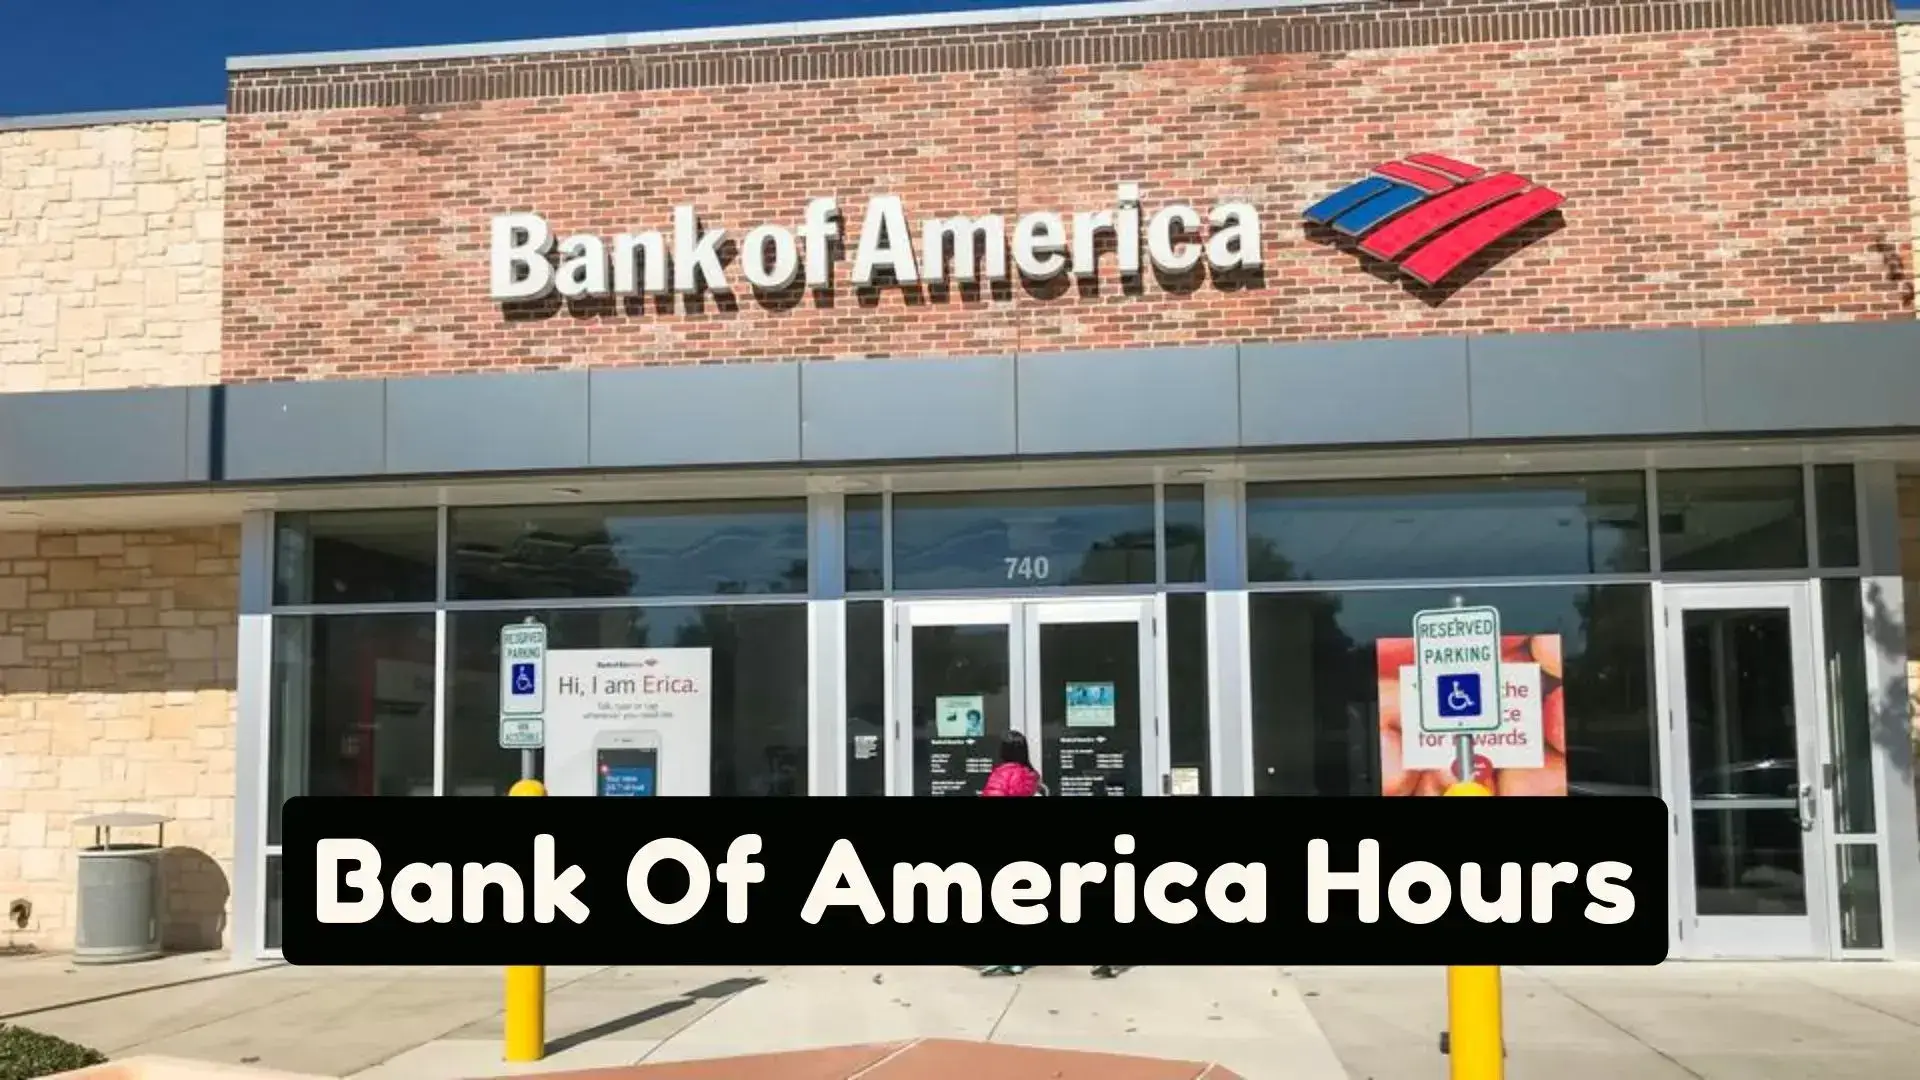 Bank of America Hours [ what time does bank of america open and close ?]